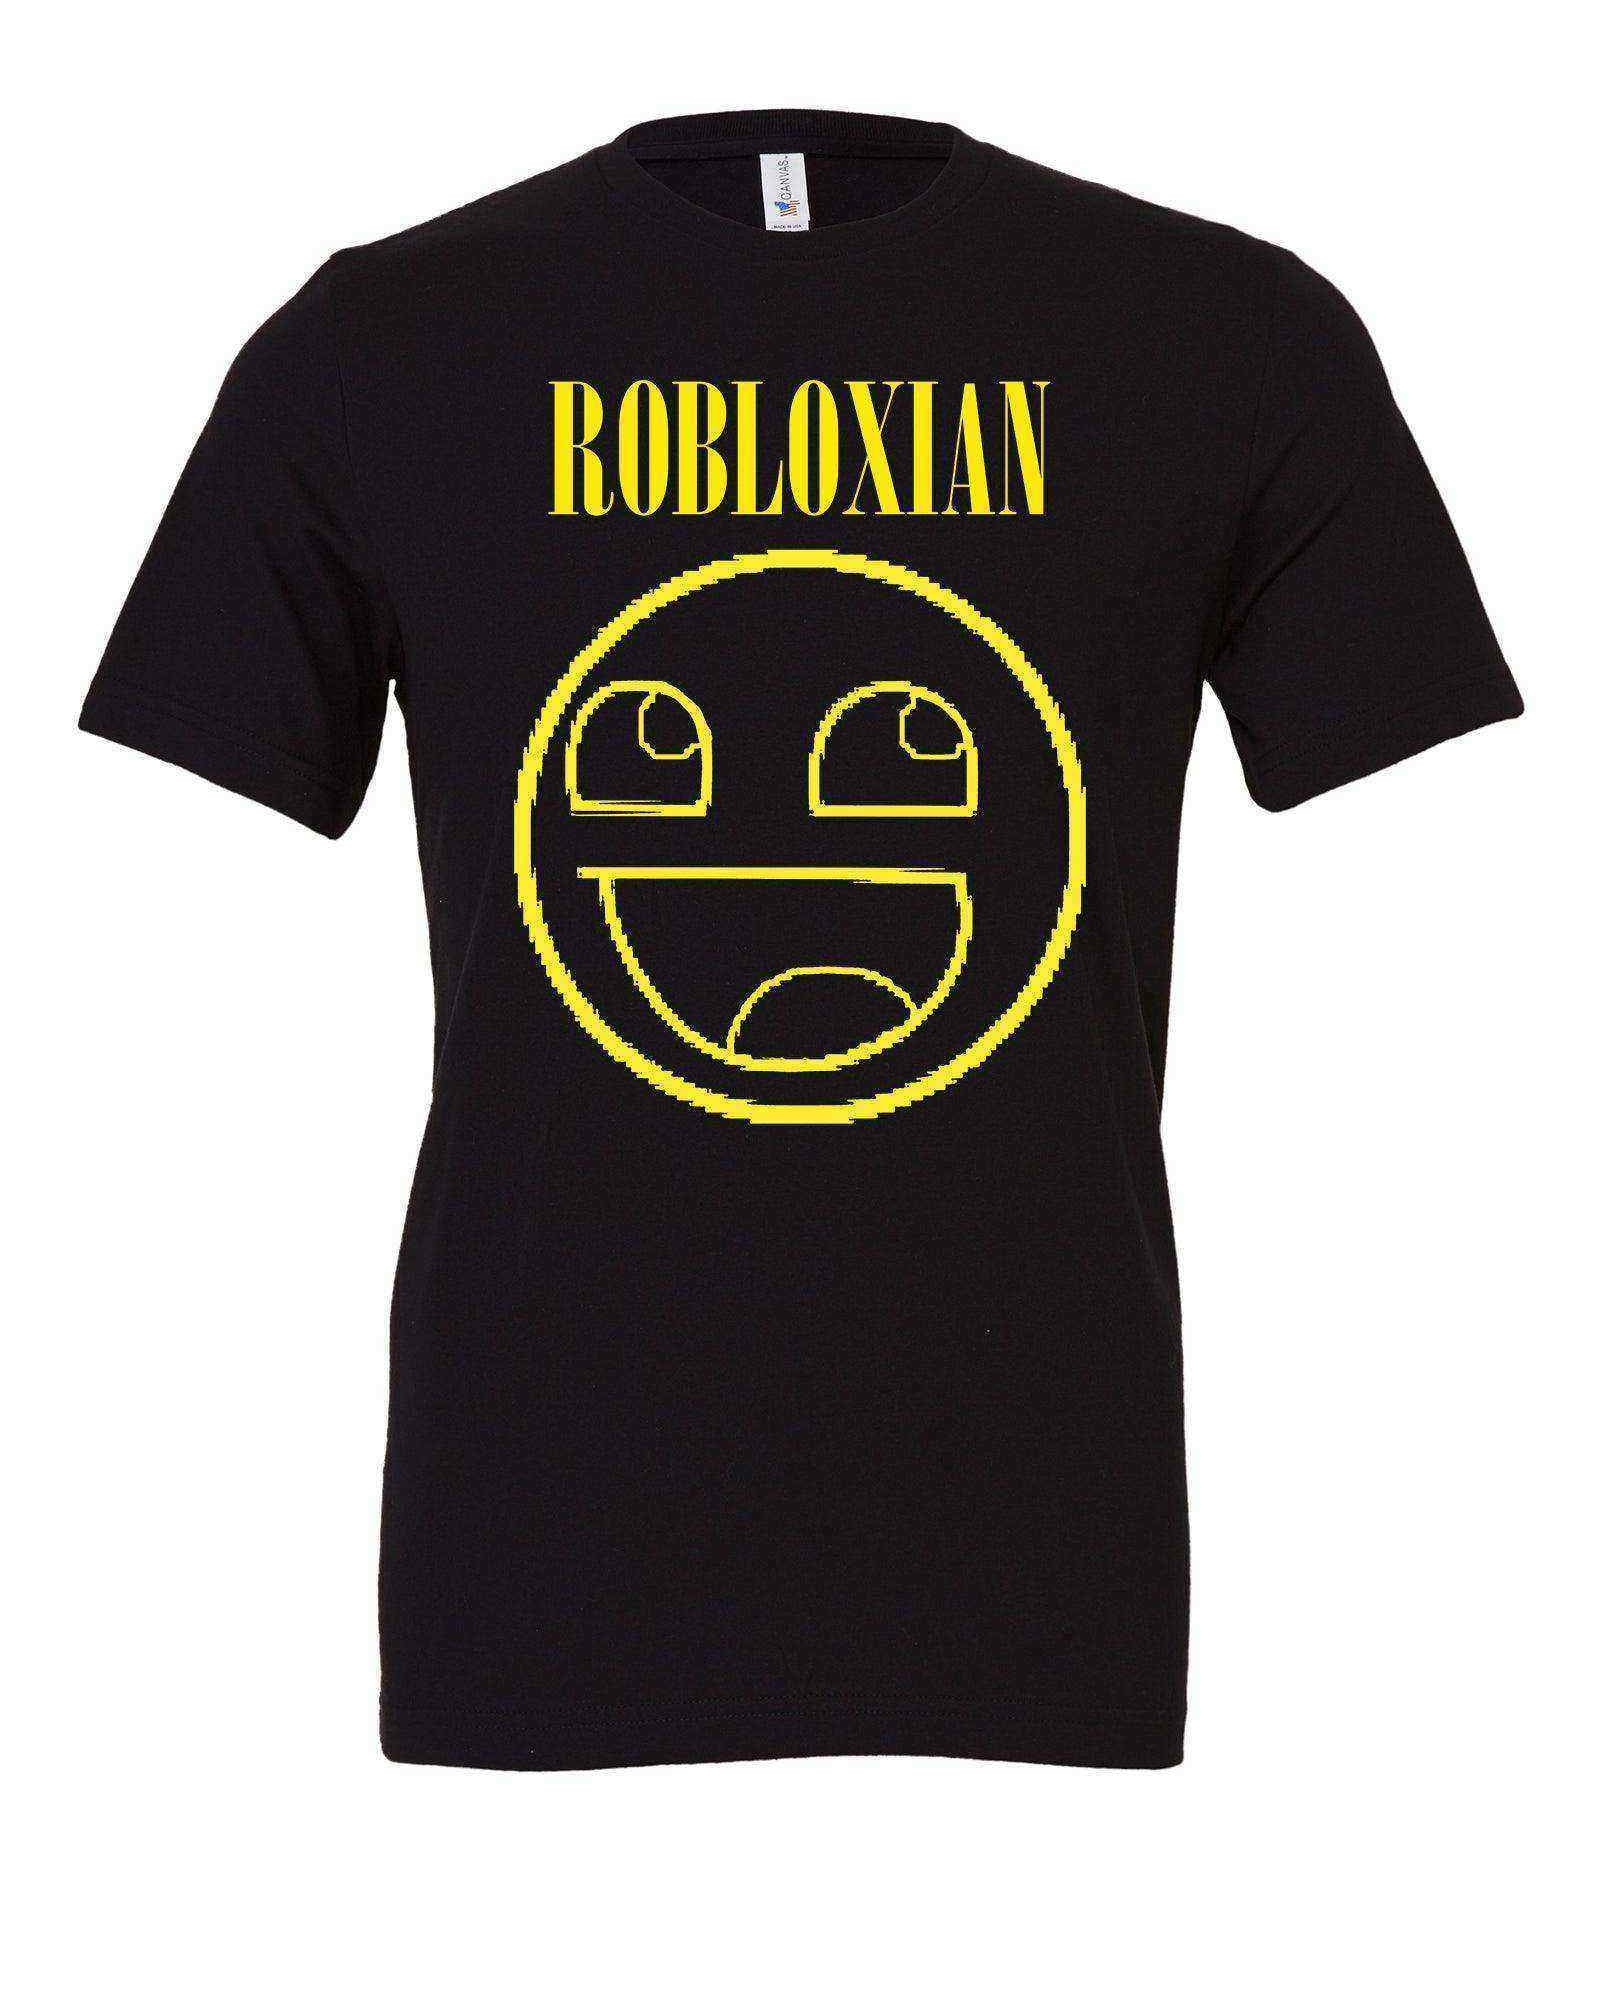 Youth | Robloxian Tee | Kids Band Tee | Gamer Shirt - Dylan's Tees